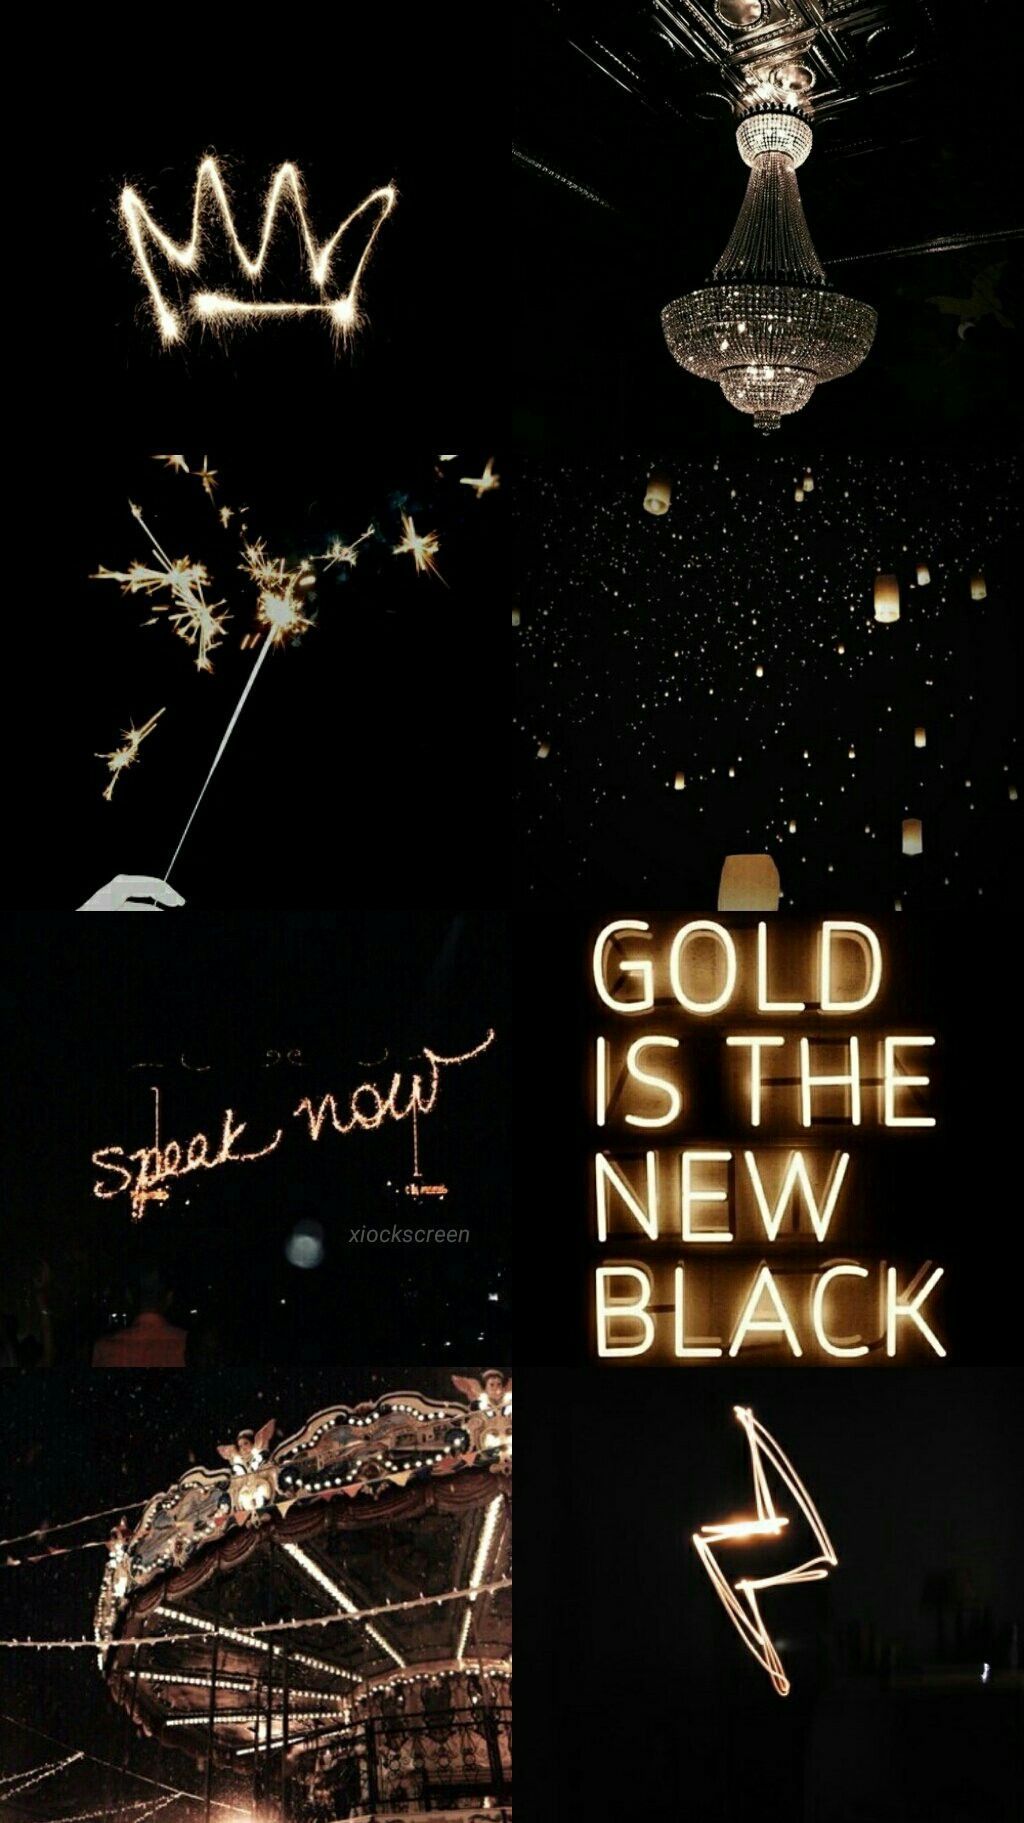 Collage of black and gold aesthetic images including a crown, fireworks, a chandelier, and a neon sign - Science, gold